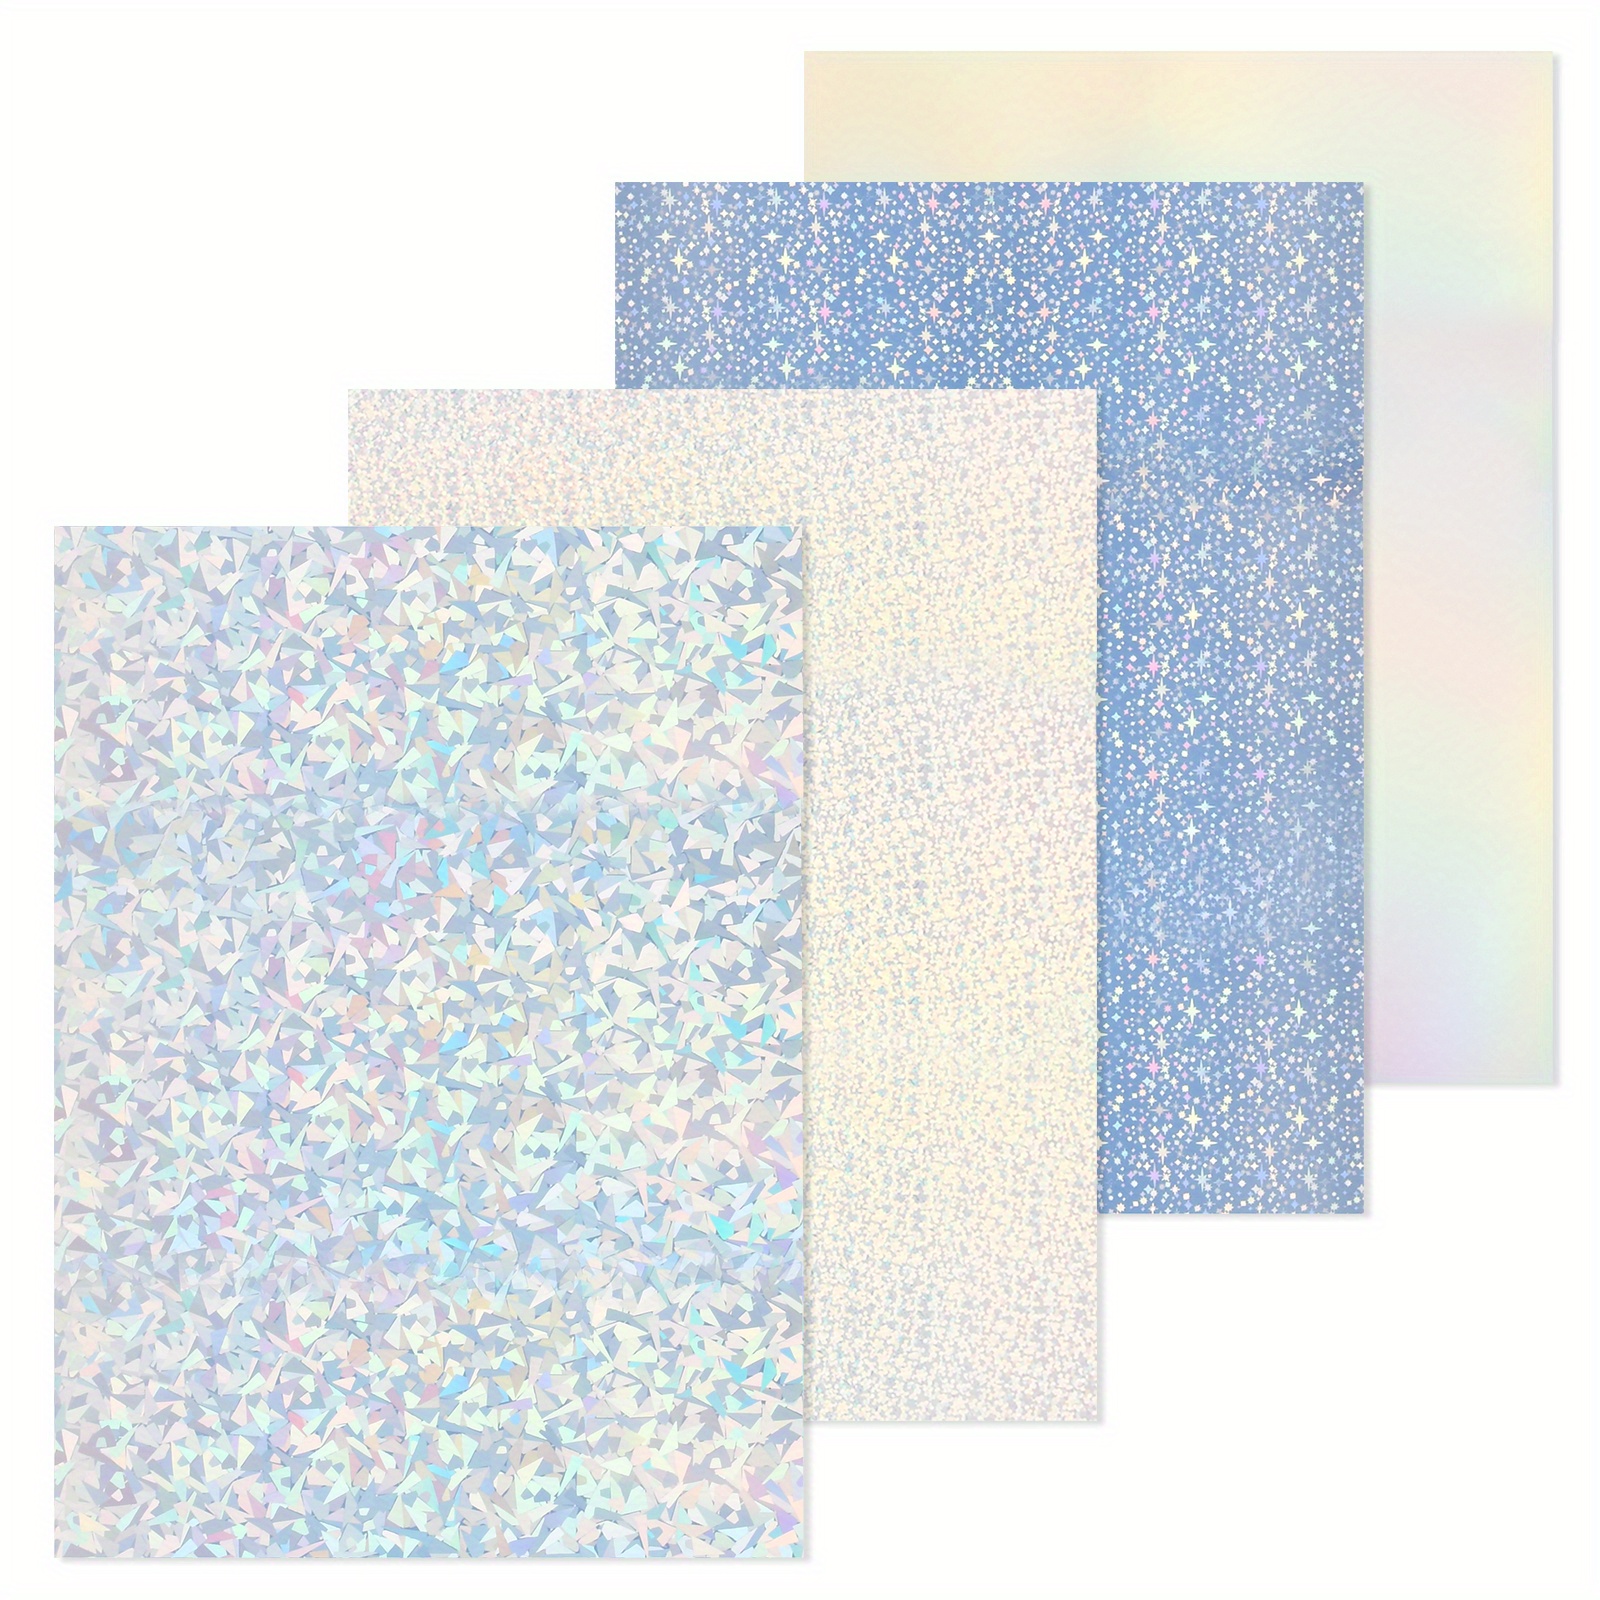  30 Sheets 6 Styles Transparent Holographic Overlay Holographic  Vinyl Overlay Clear Holographic Laminate Sheets Adhesive Laminated Film  Glossy Craft Sheet for Stickers, A4 Size, 8.3 x 11.7 Inches : Arts, Crafts  & Sewing